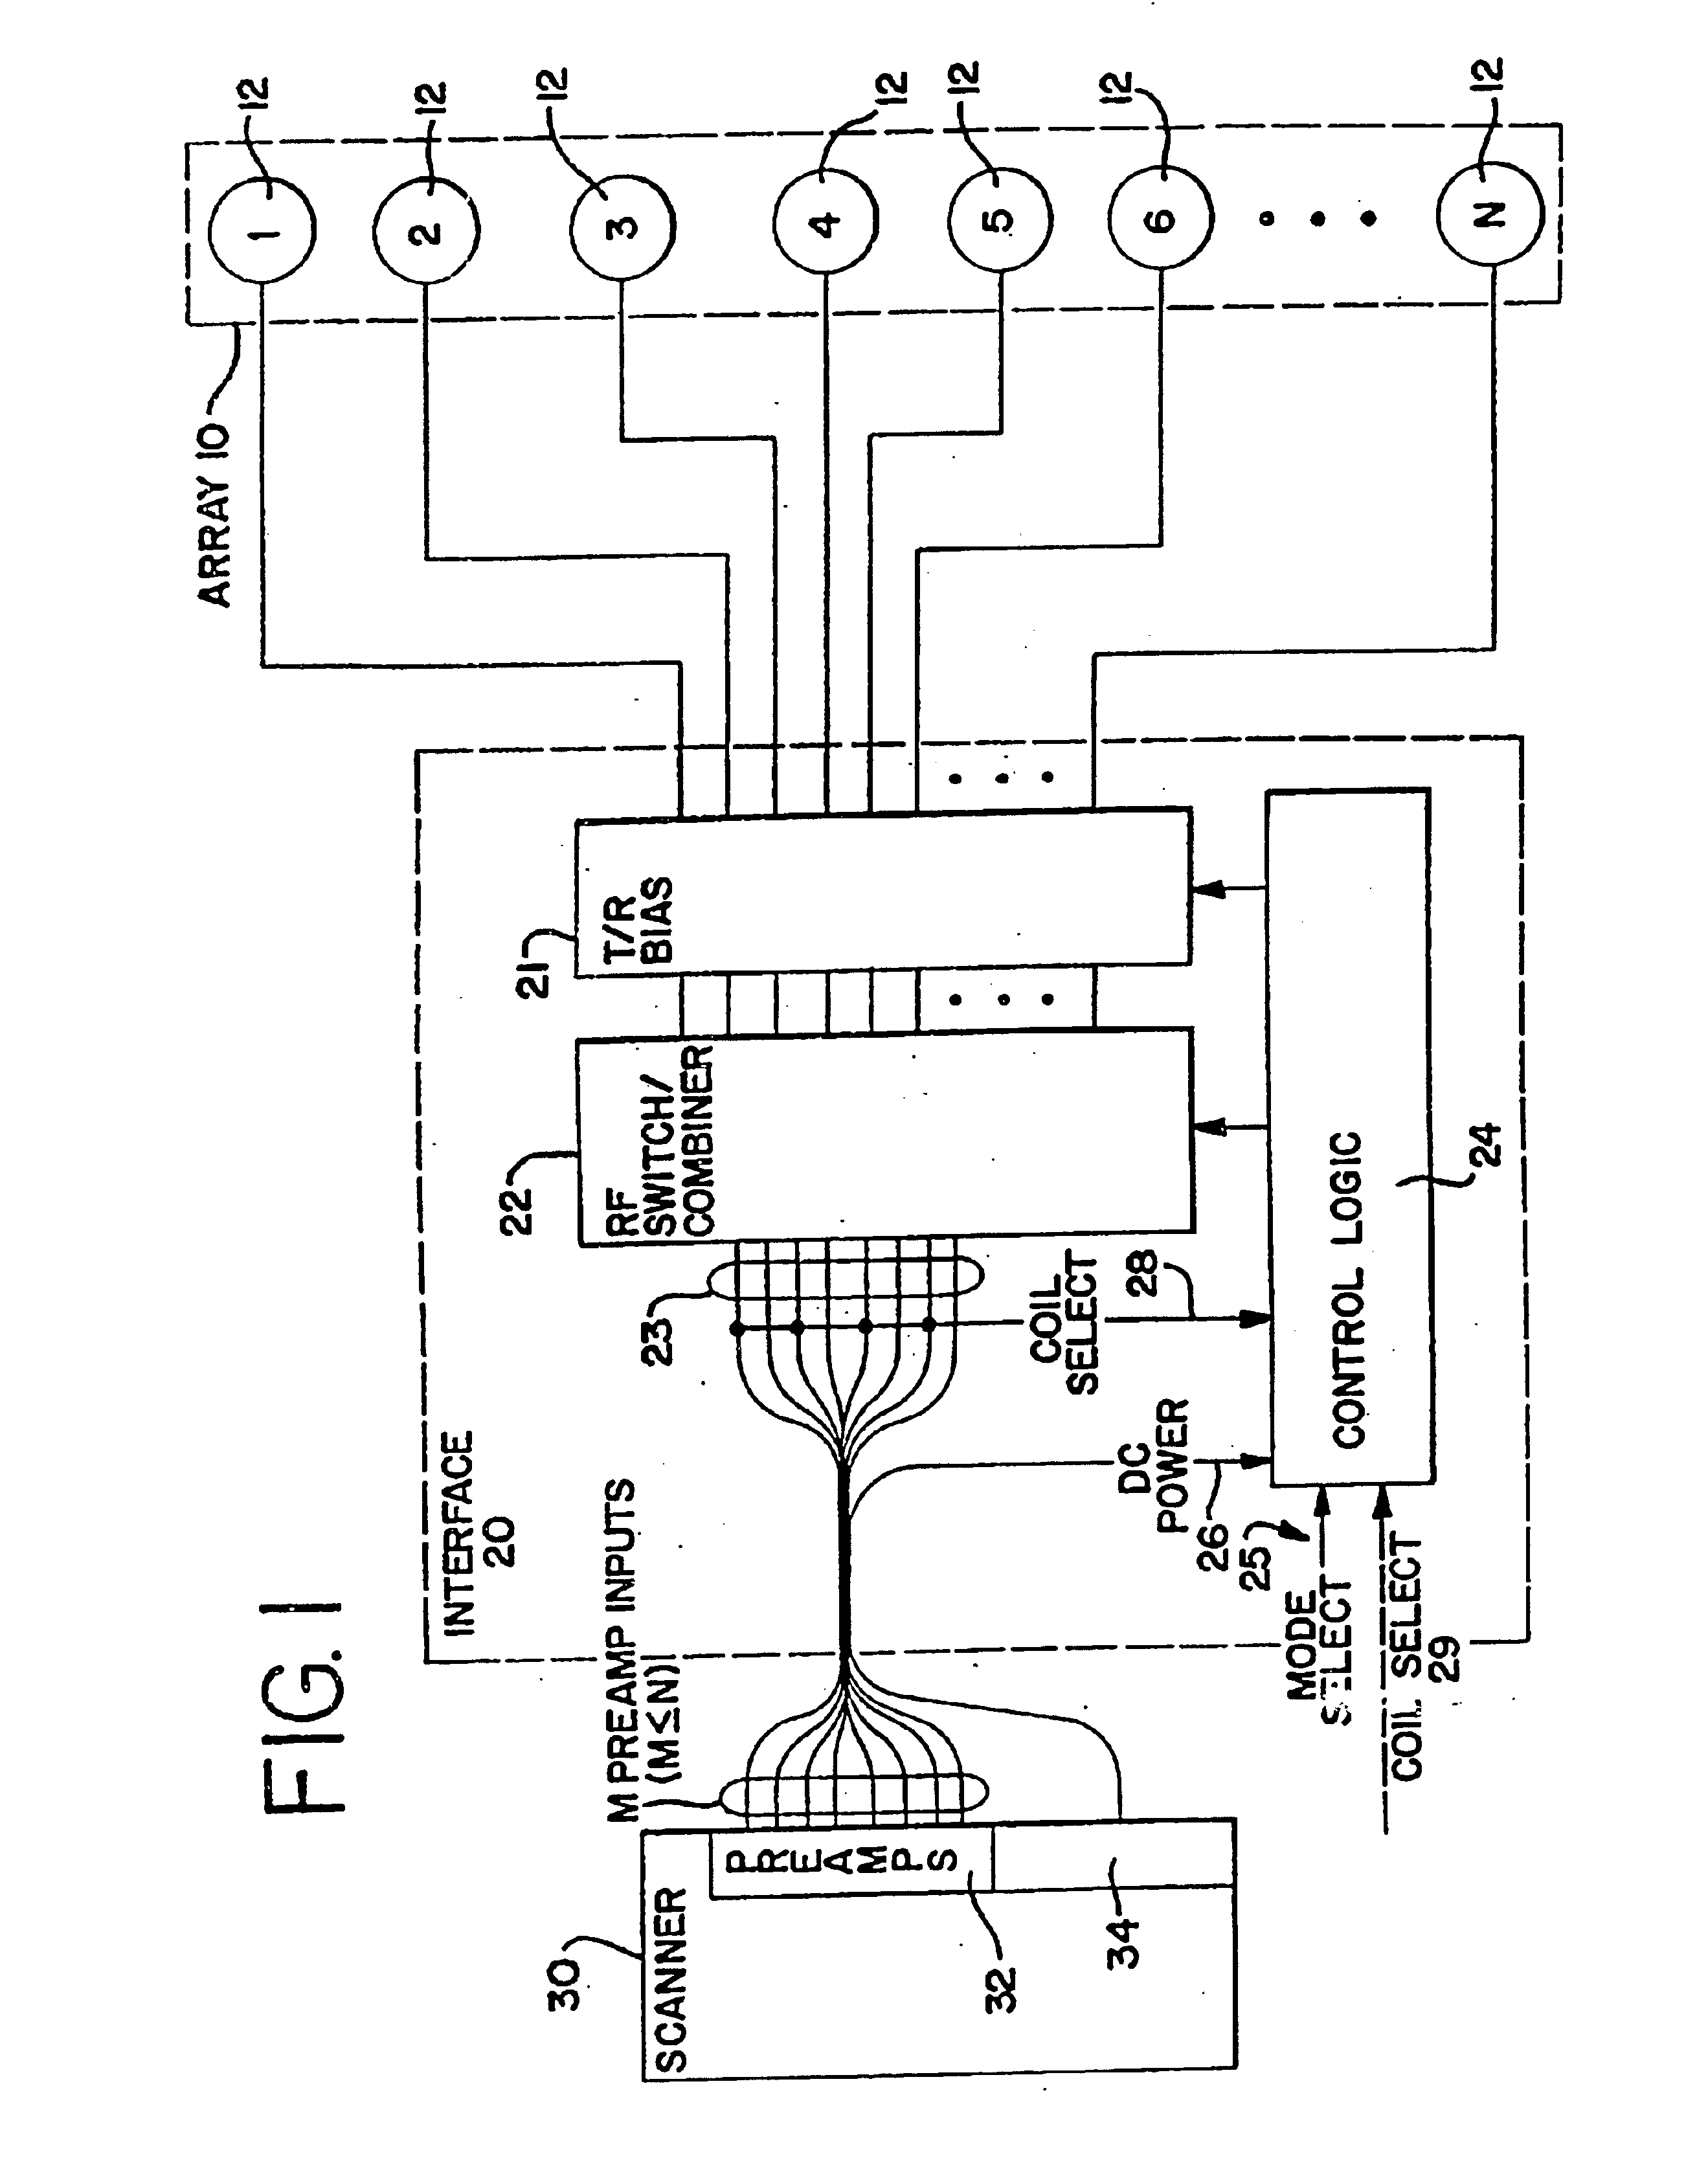 Circuit for selectively enabling and disabling coils of a multi-coil array